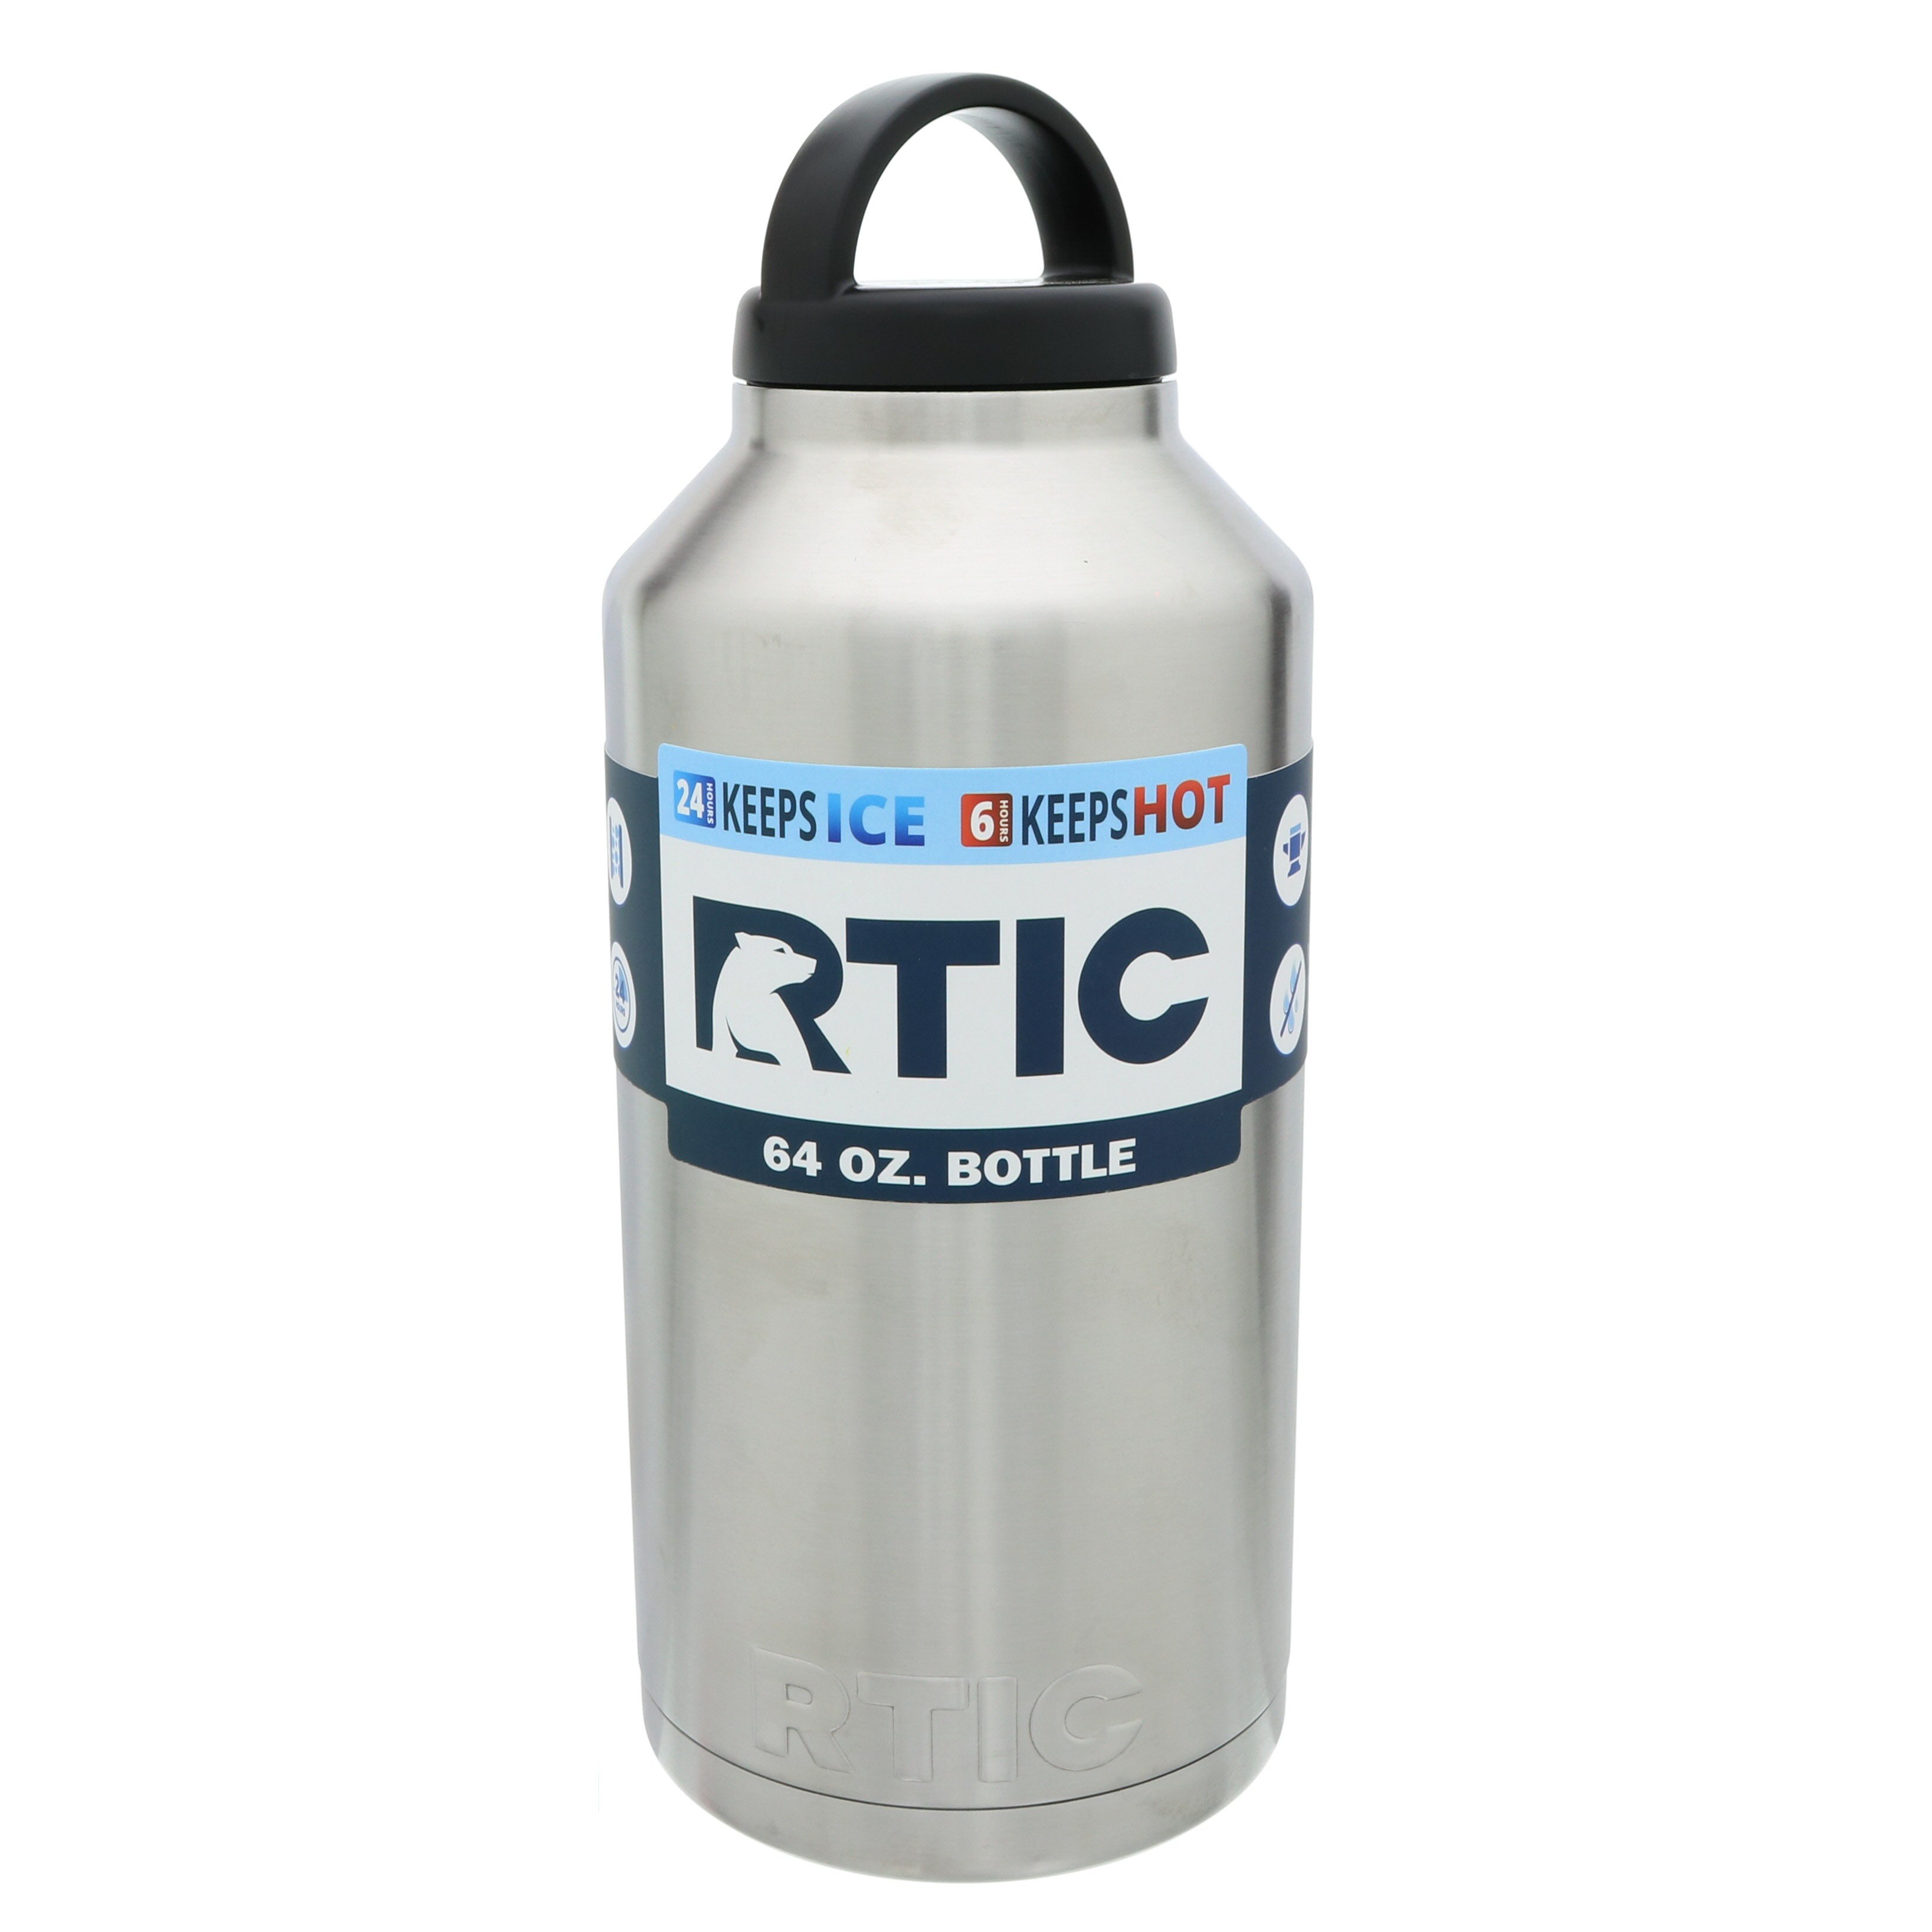 RTIC 64oz Bottle - Shop Travel & To-Go at H-E-B